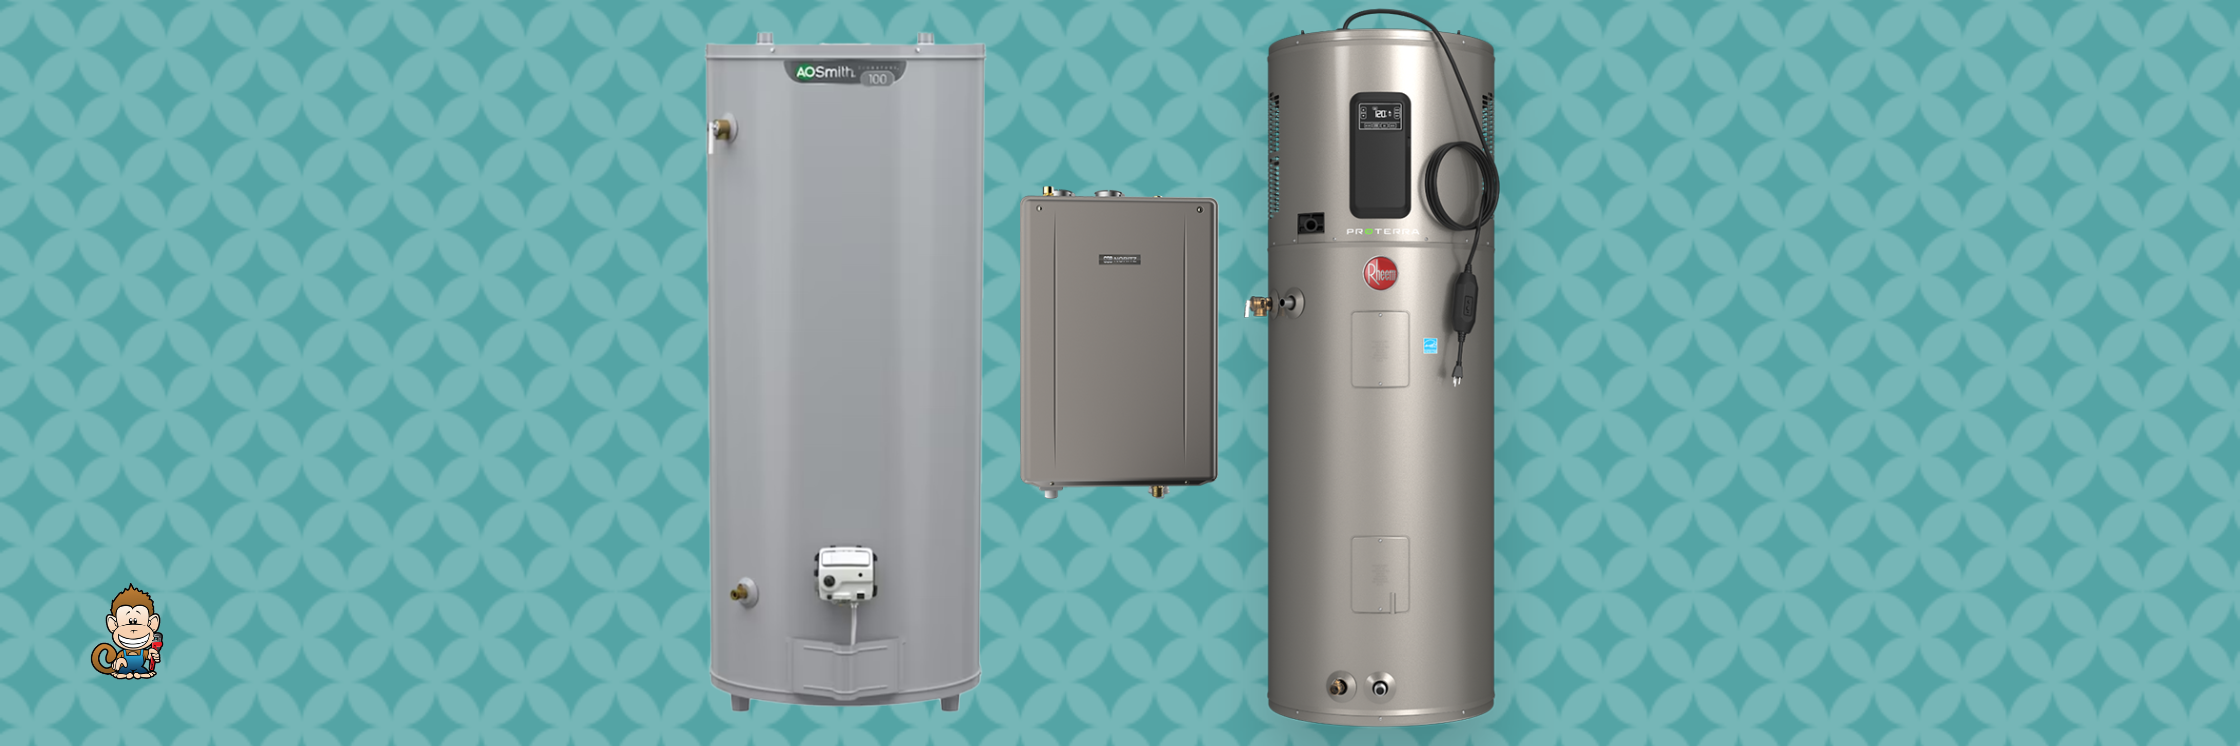 How Much Does a Water Heater Cost?